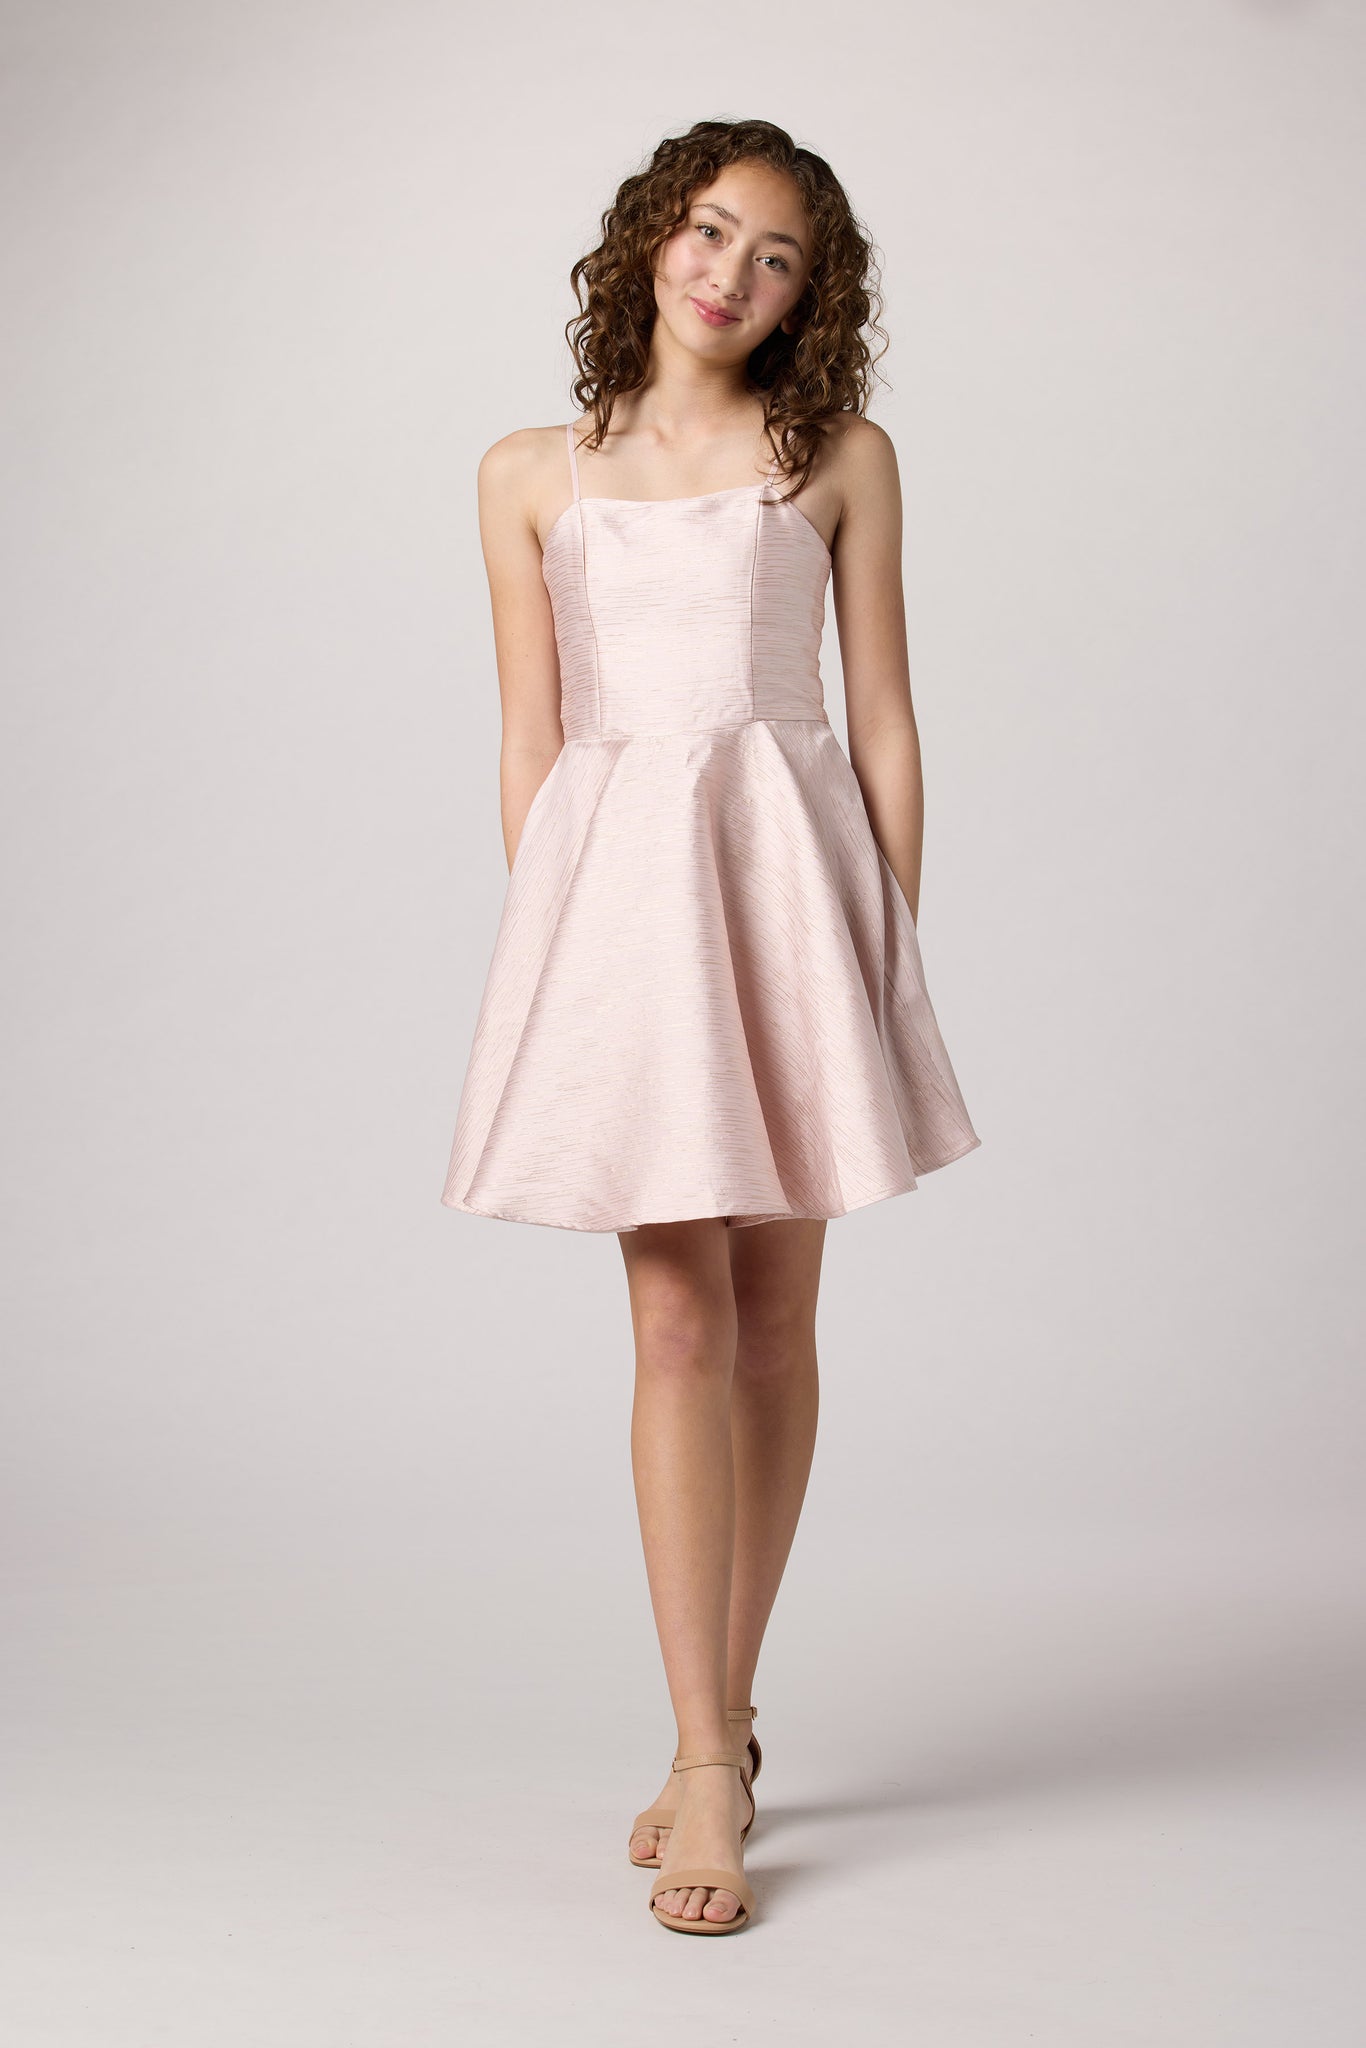 Brunette girl in an Un Deux Trois light pink jacquard fit and flare dress.